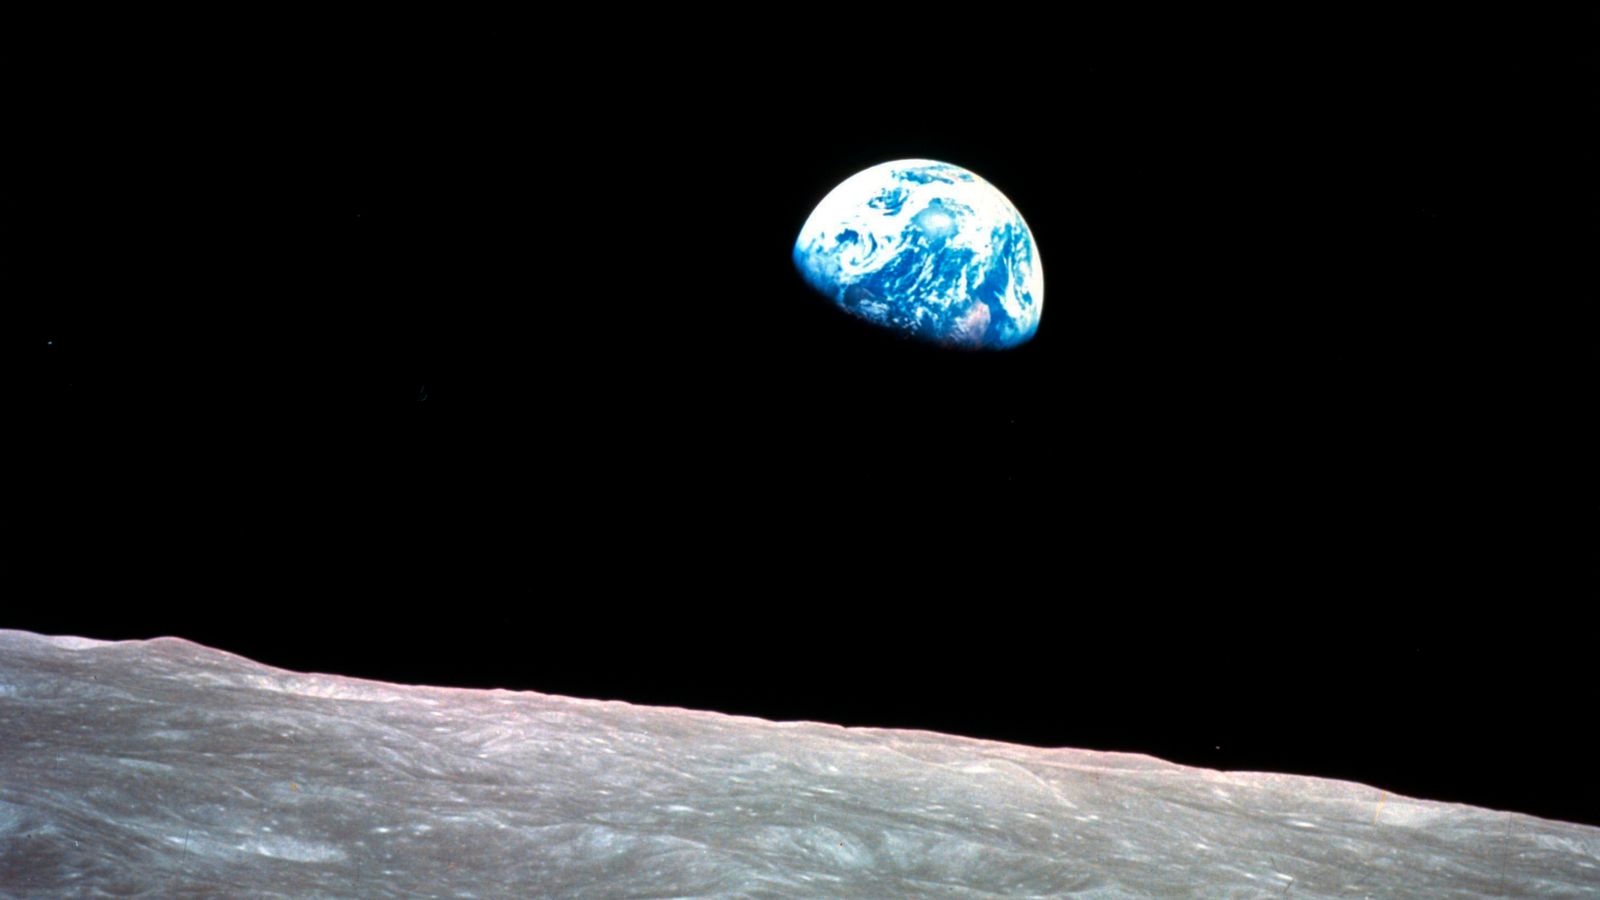 Astronaut William Anders who captured iconic 'Earthrise' image dies in plane crash